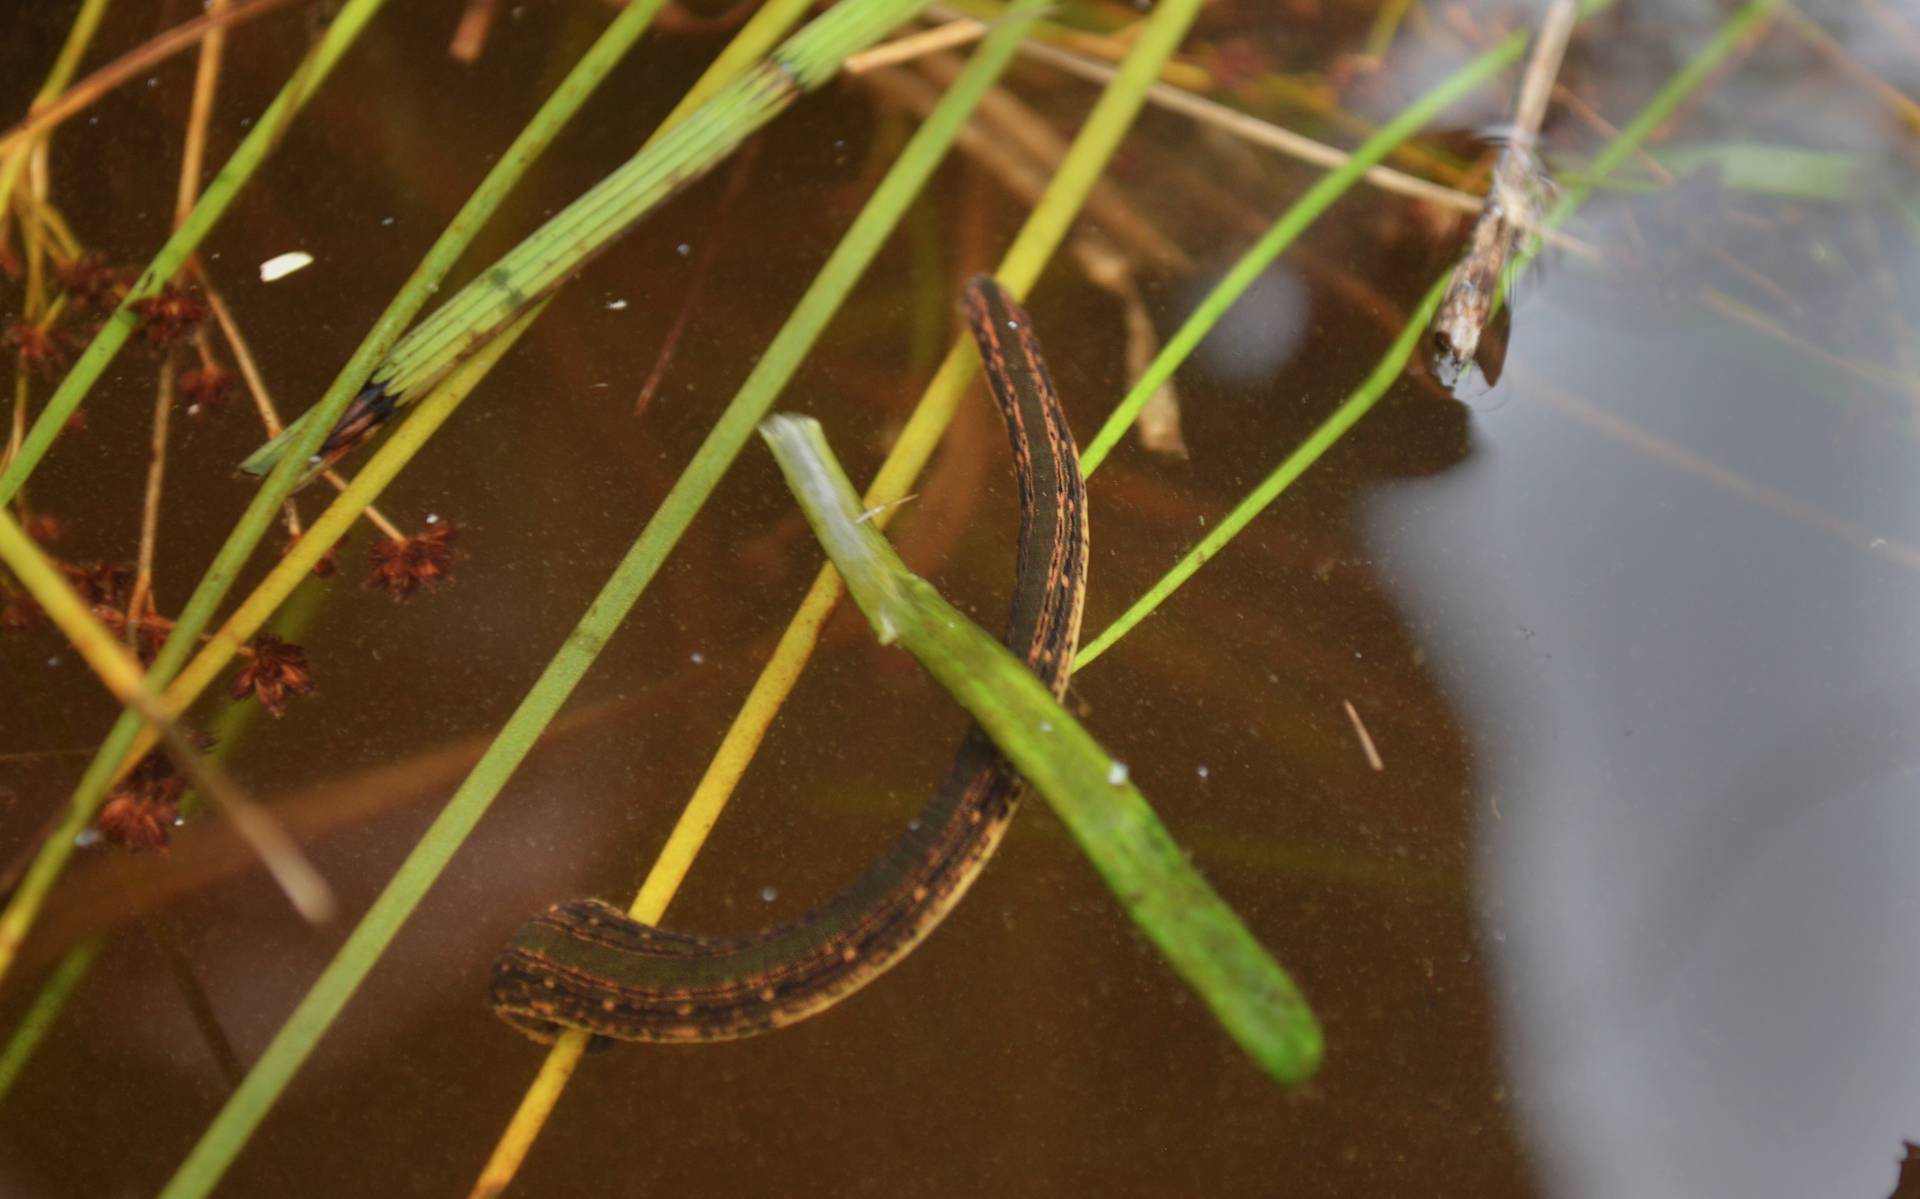 Medicinal leech swimming in water in wild

Image: RZSS CONSERVATION